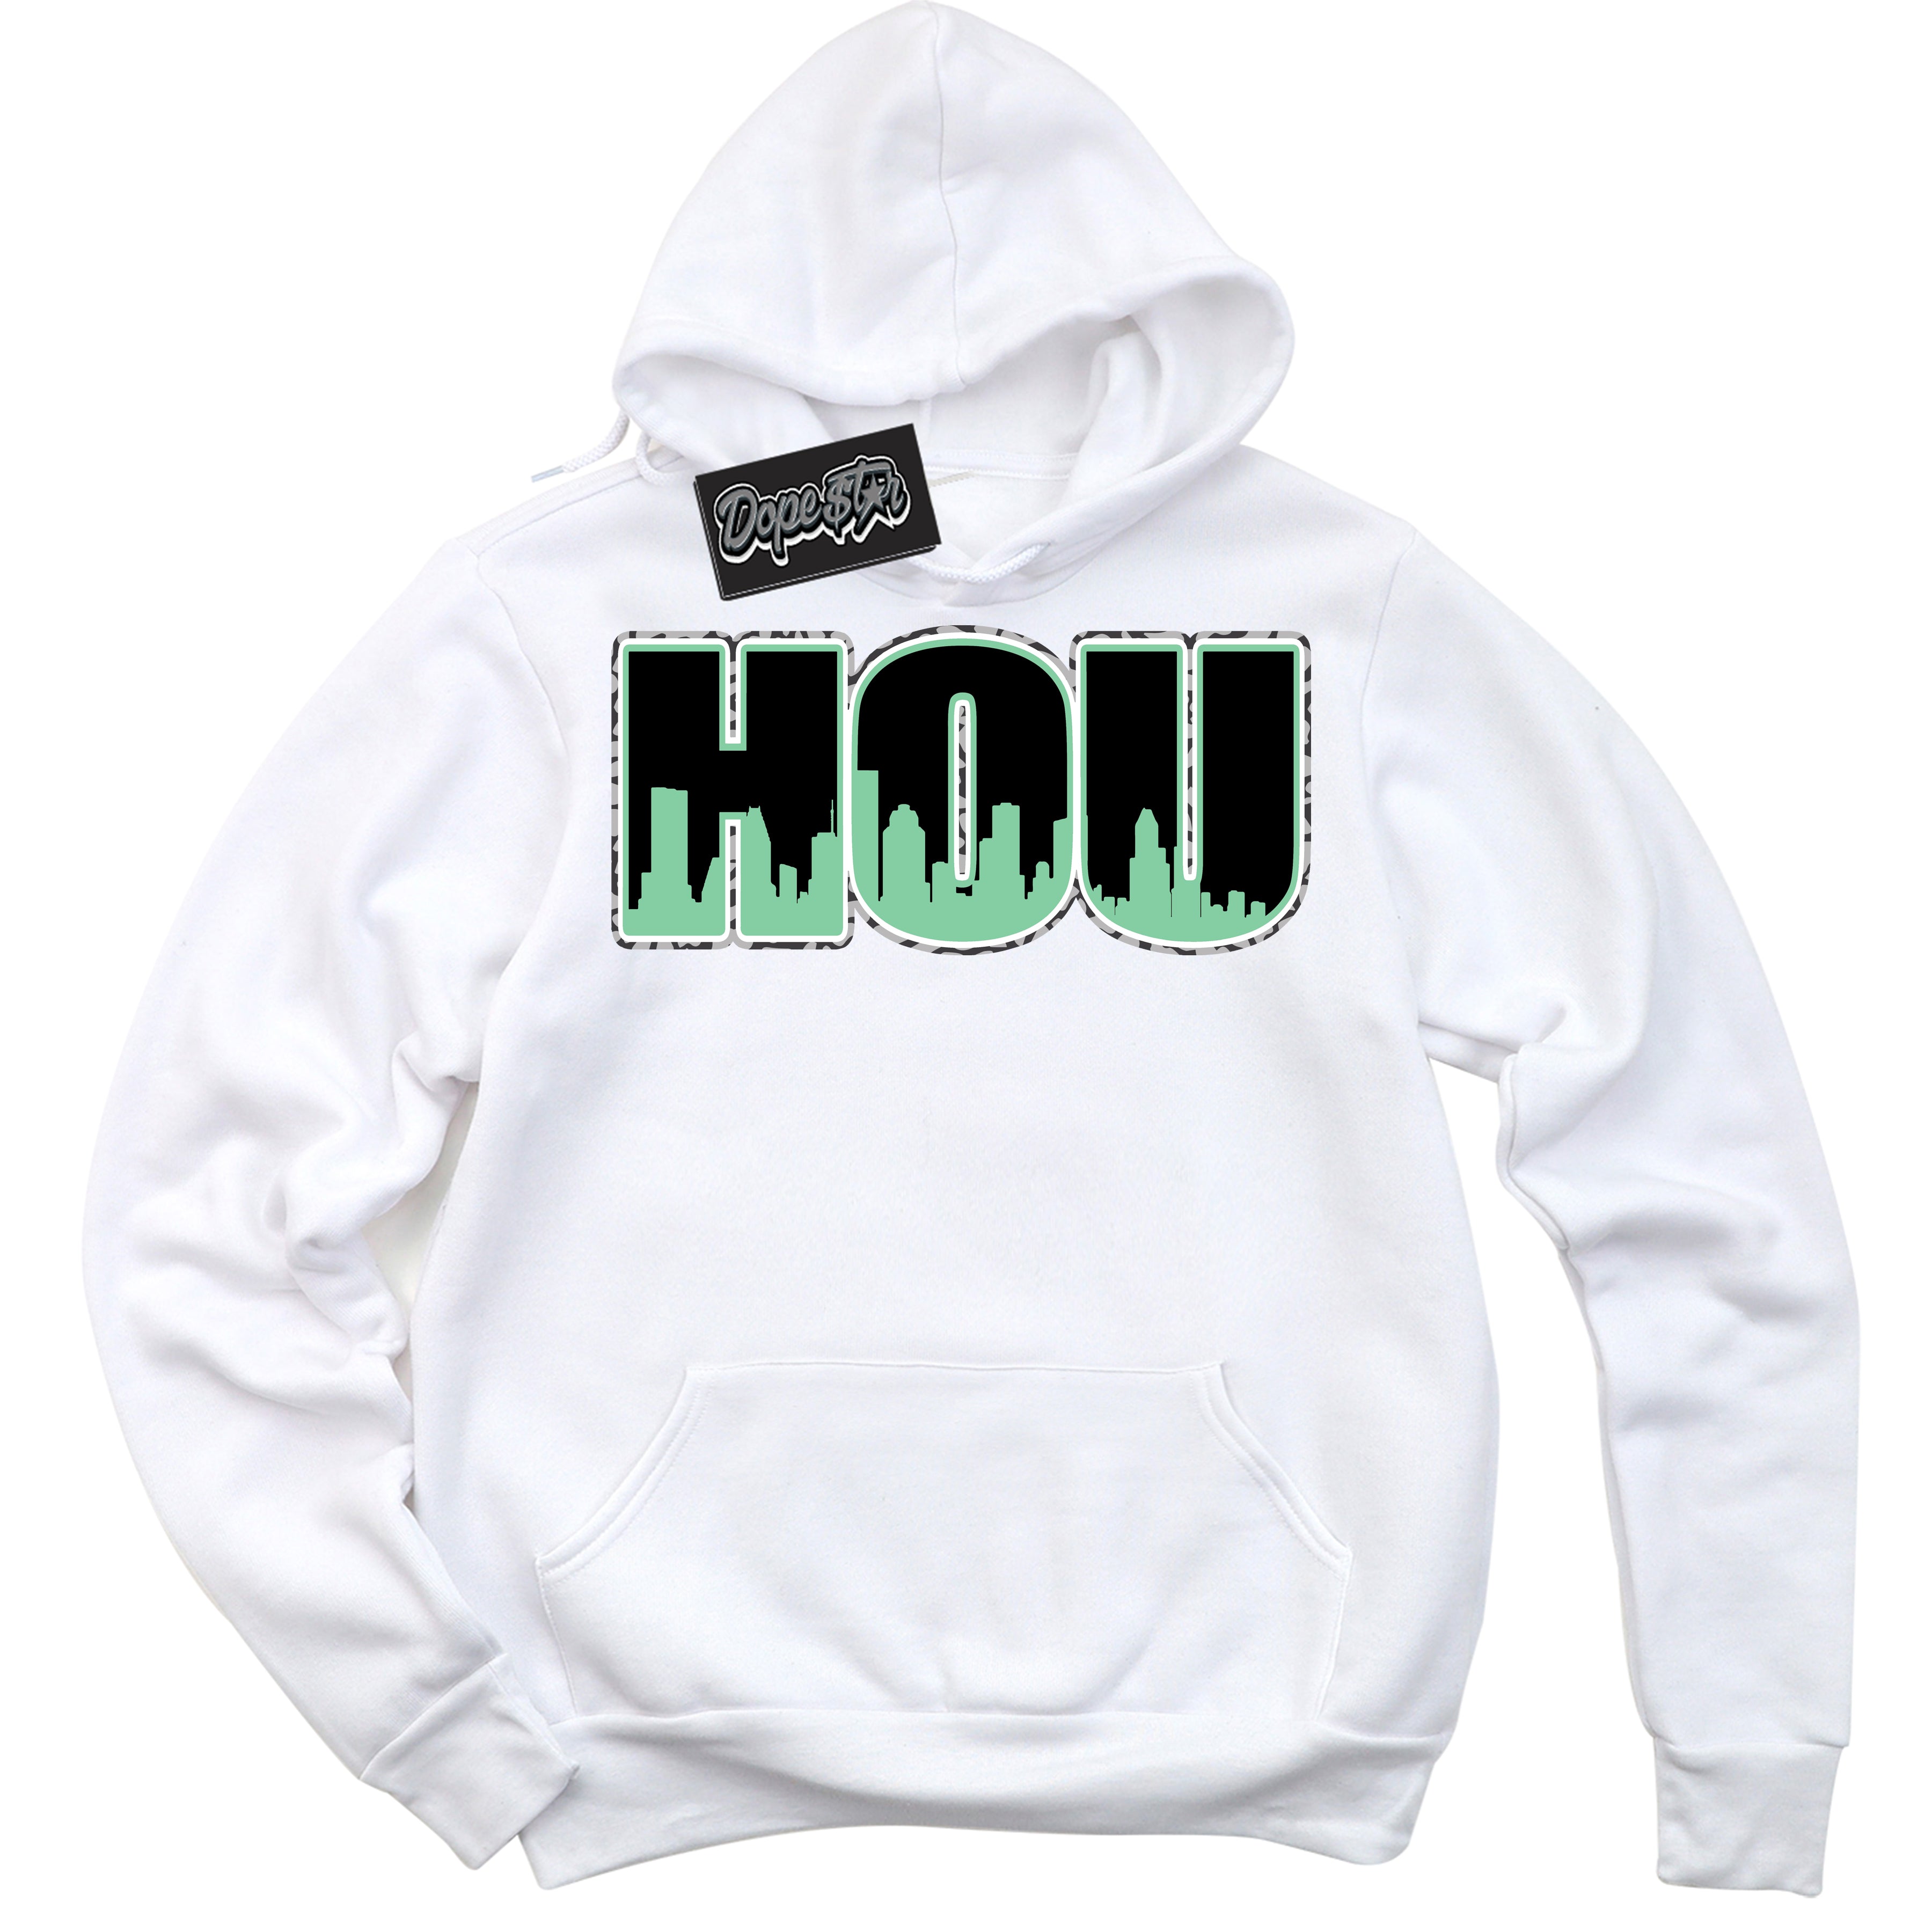 Cool White Graphic DopeStar Hoodie with “ Houston “ print, that perfectly matches Green Glow 3s sneakers